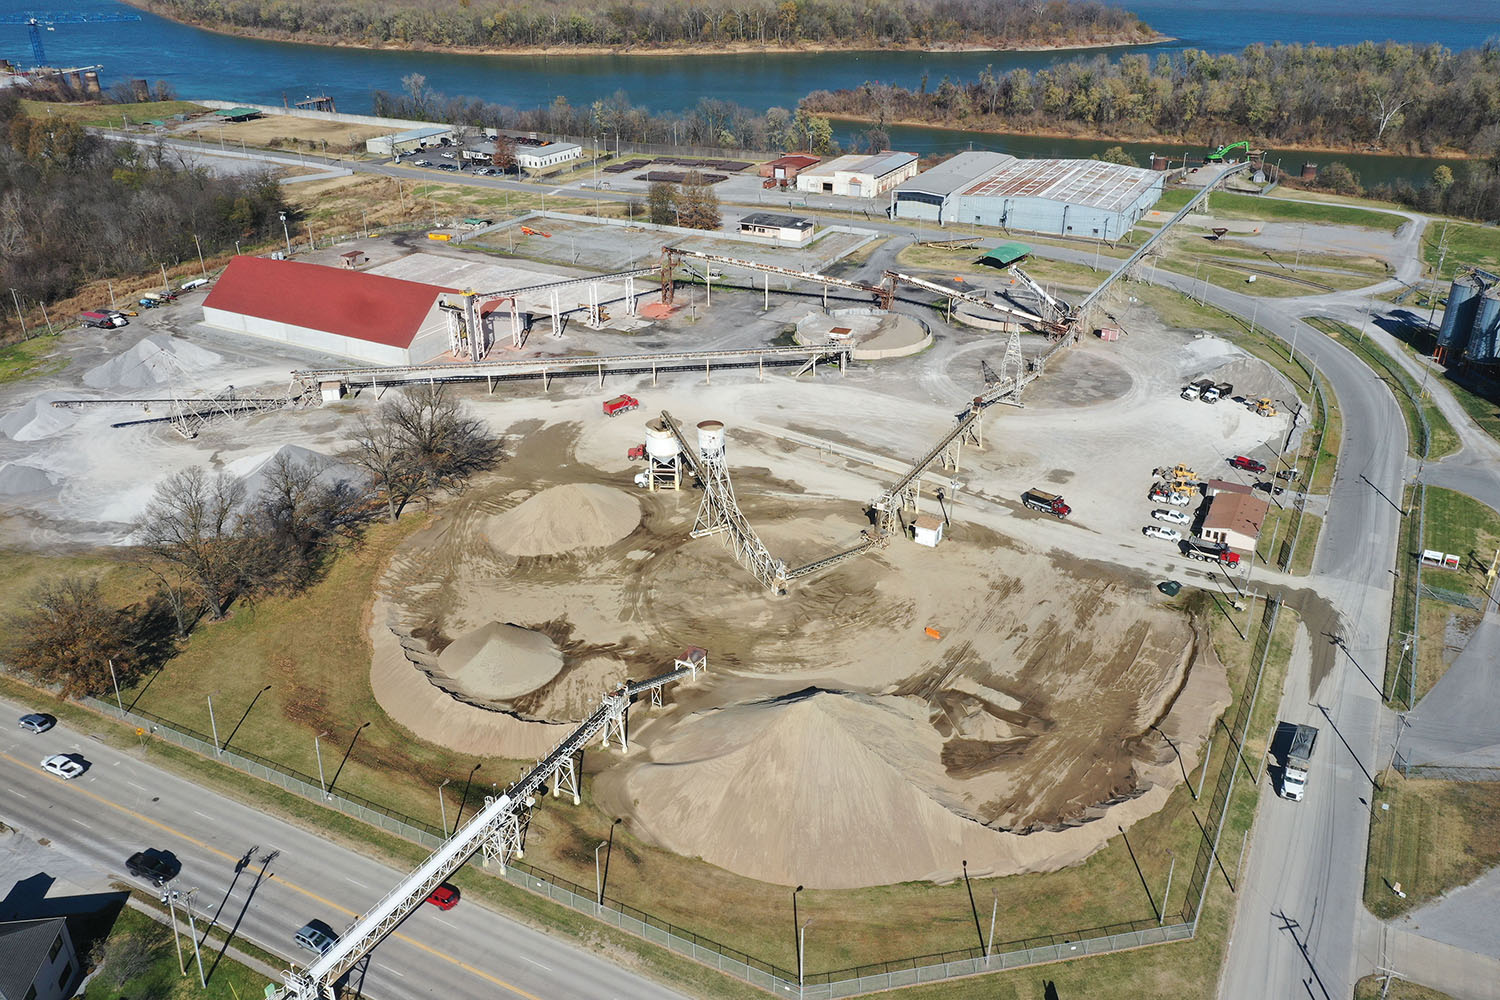 The Paducah-McCracken County Riverport Authority recently received a $3.32 million MarAd PIDP grant that will allow the modernization of its bulk commodity yard over the next few years. (Photo courtesy of Paducah-McCracken County Riverport Authority)